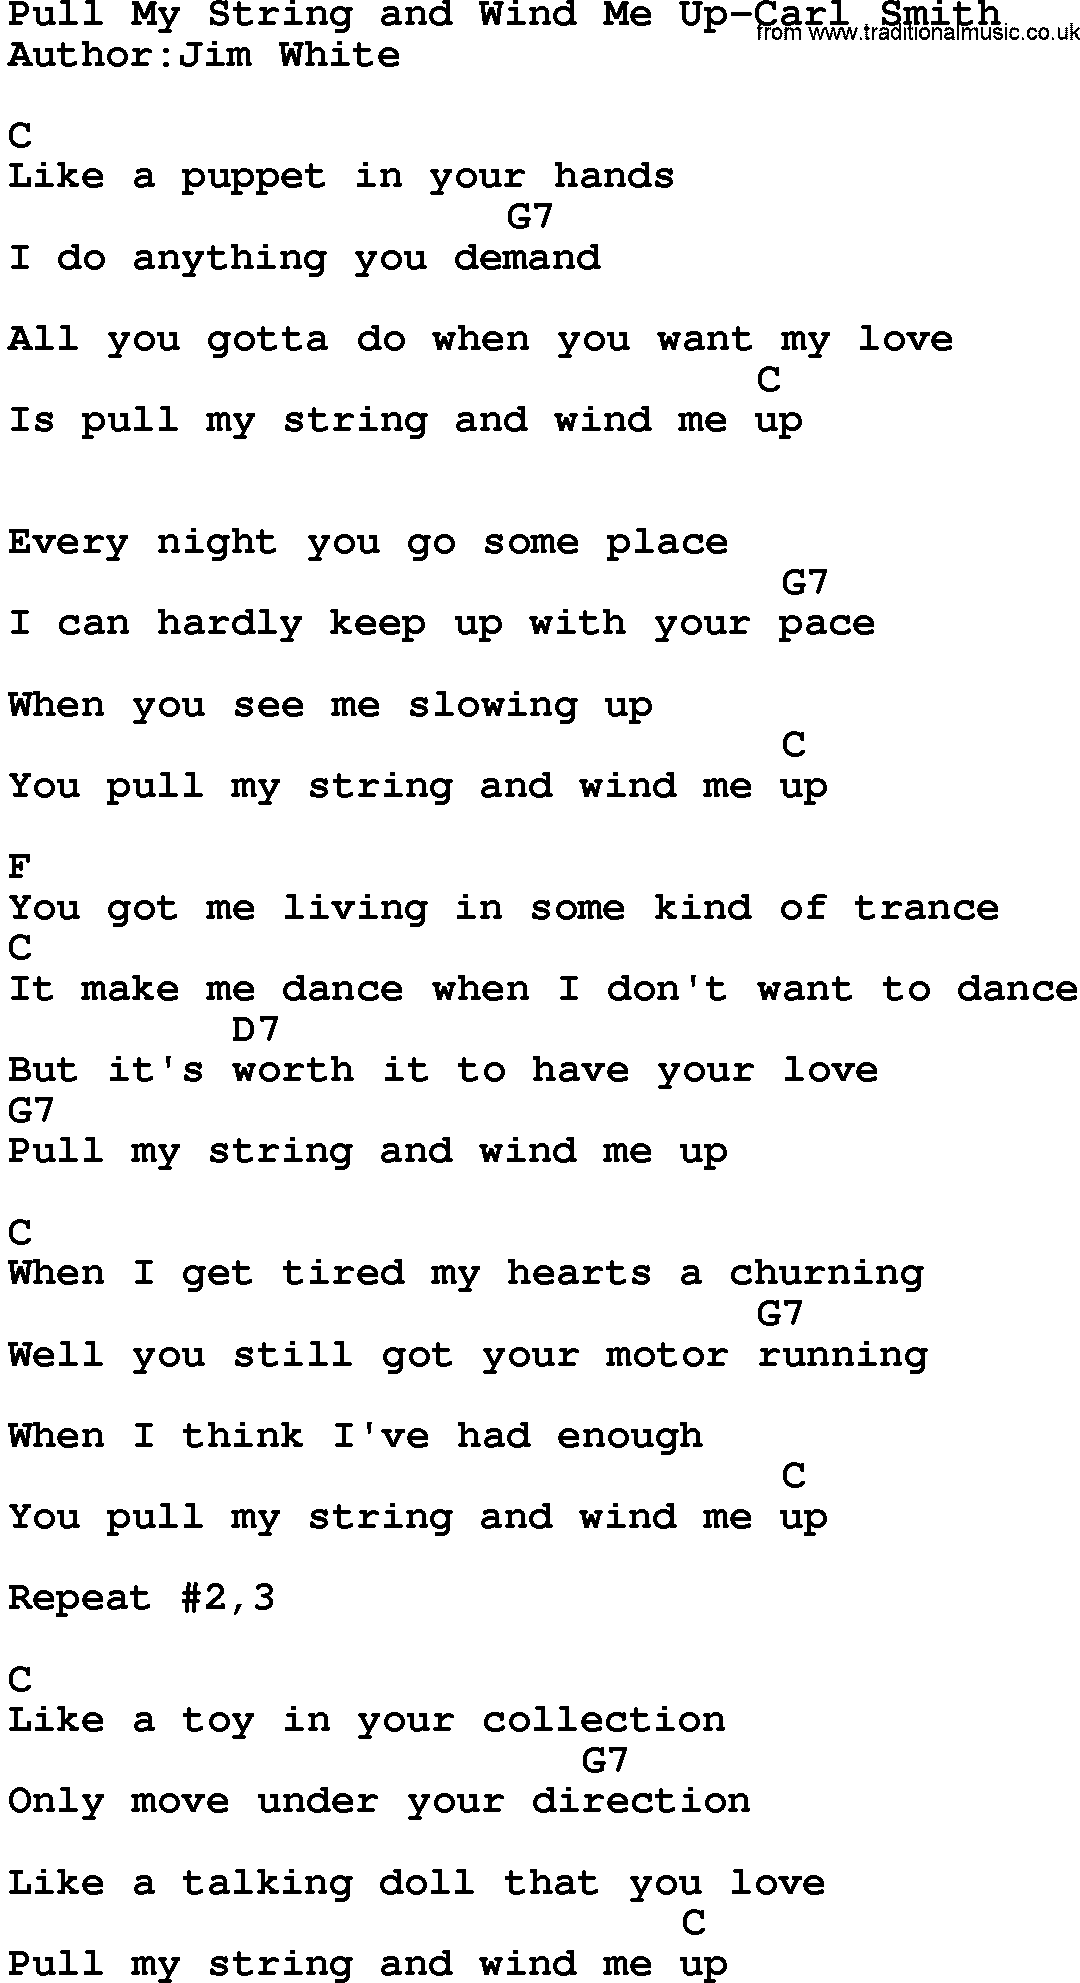 Country music song: Pull My String And Wind Me Up-Carl Smith lyrics and chords